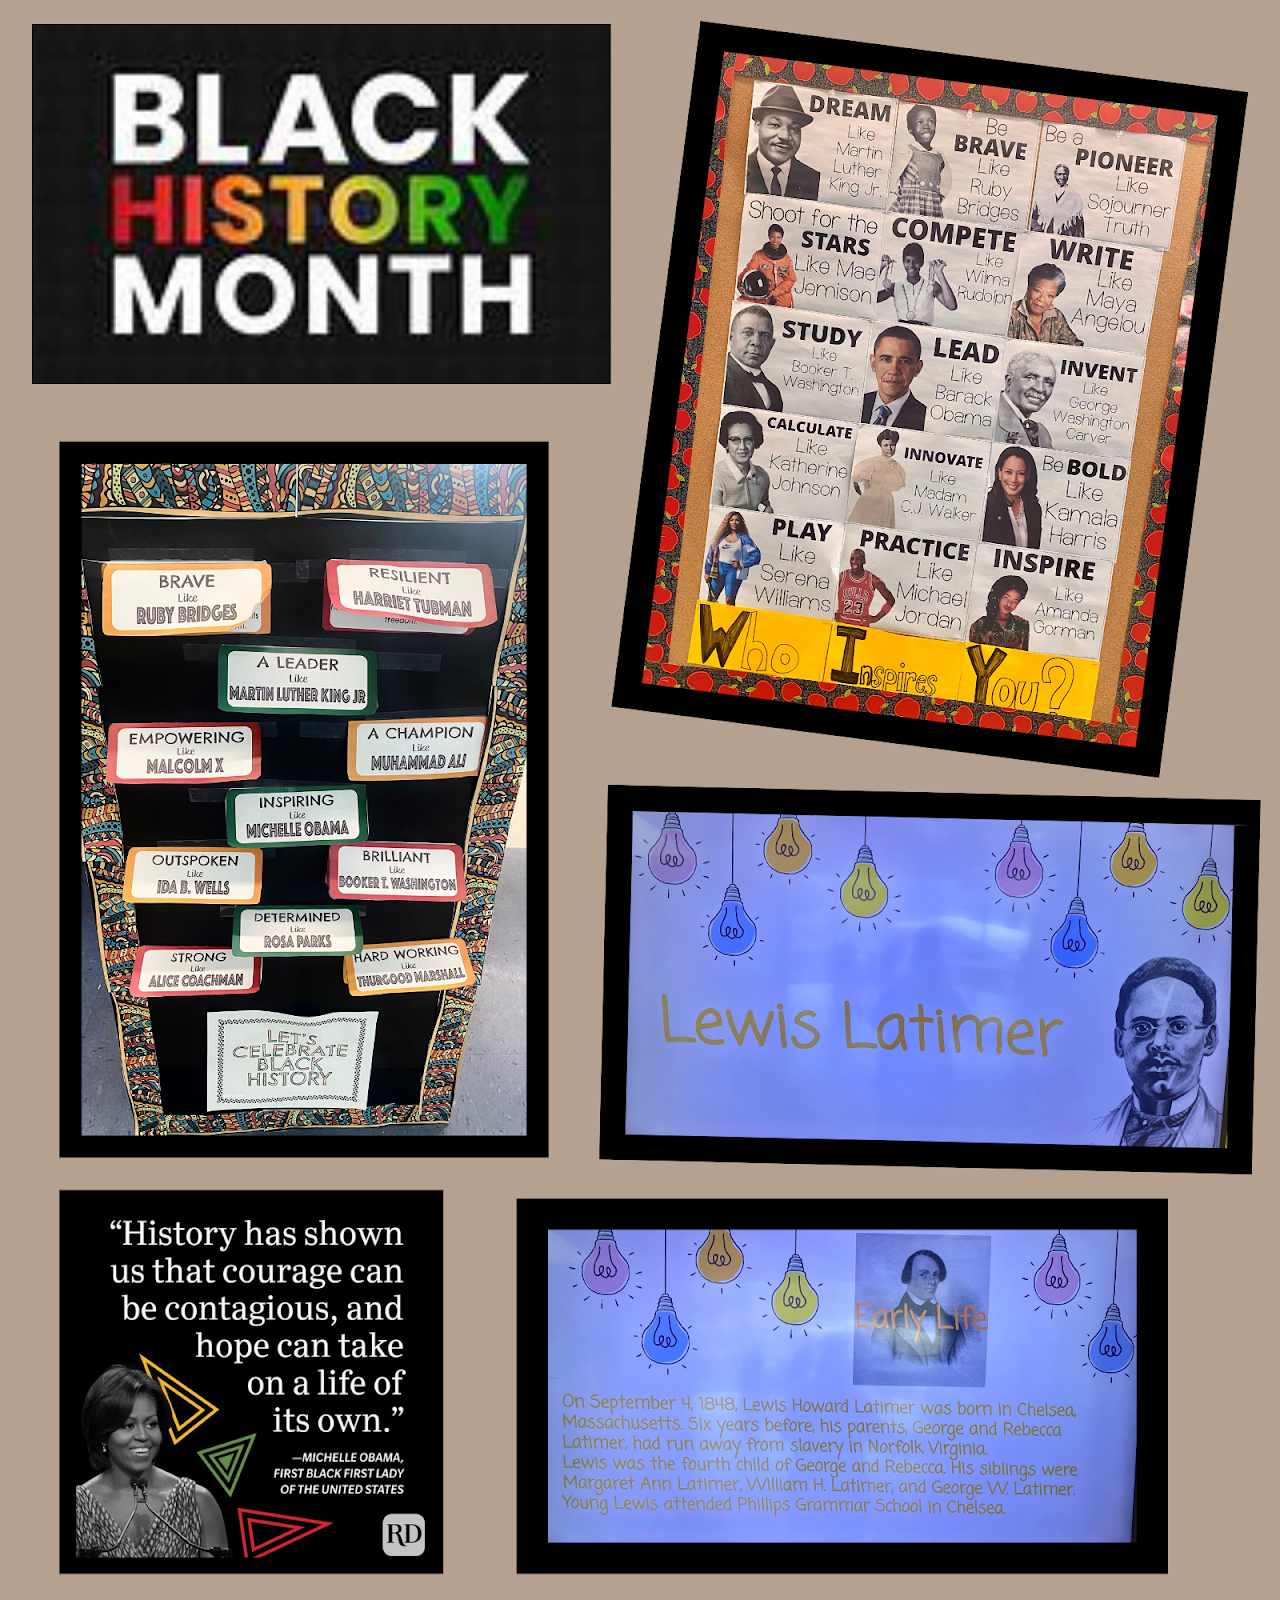 Black History Month at Rogers International